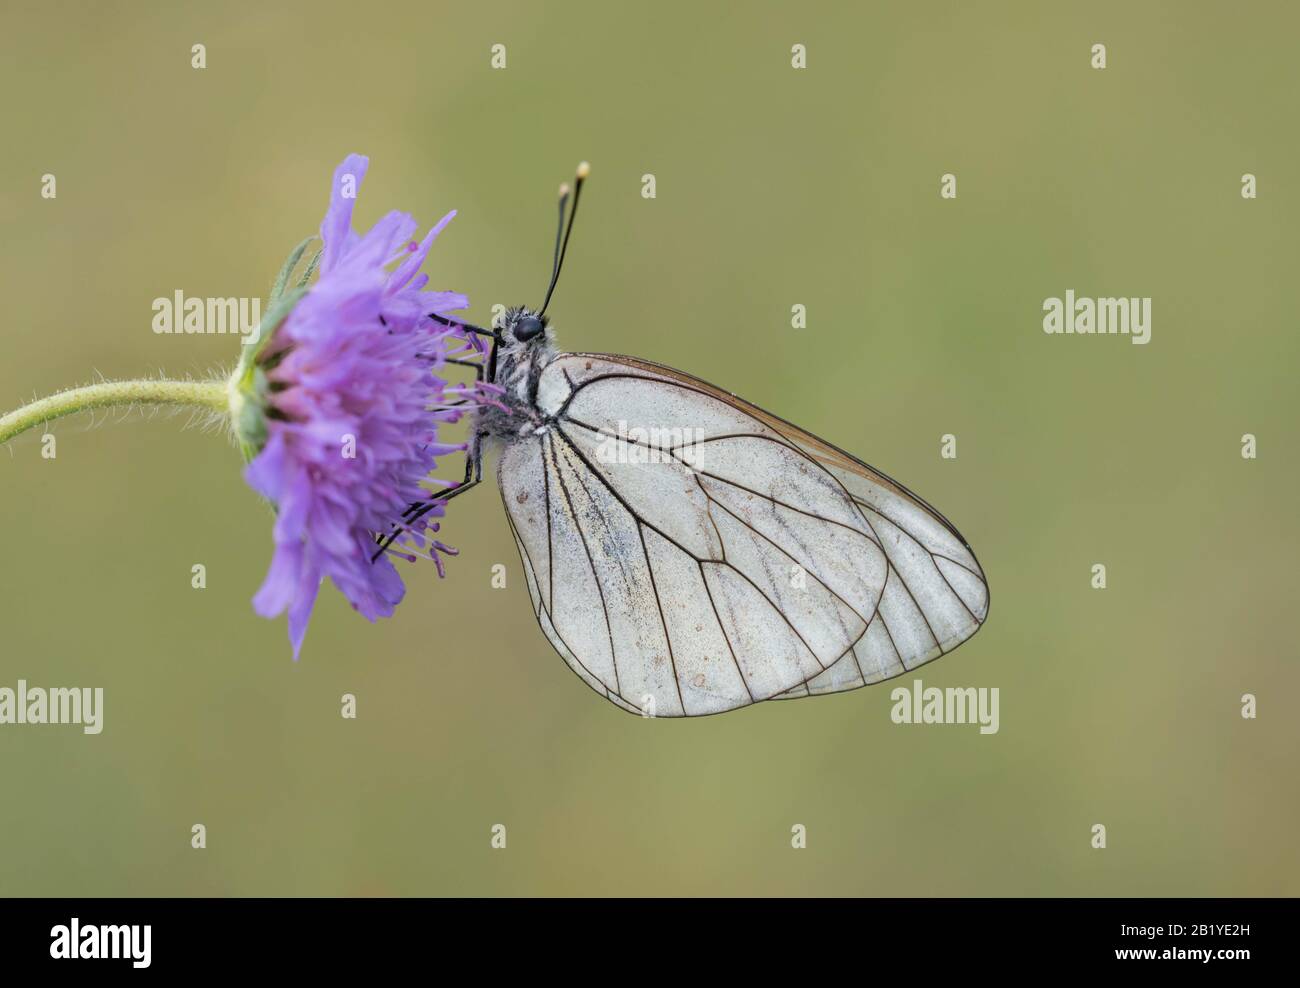 A Black-veined White butterfly (Aporia crataegi) roosting on a flowerhead. Taken early in the morning in a dewy meadow in Dordogne, Southern France. Stock Photo